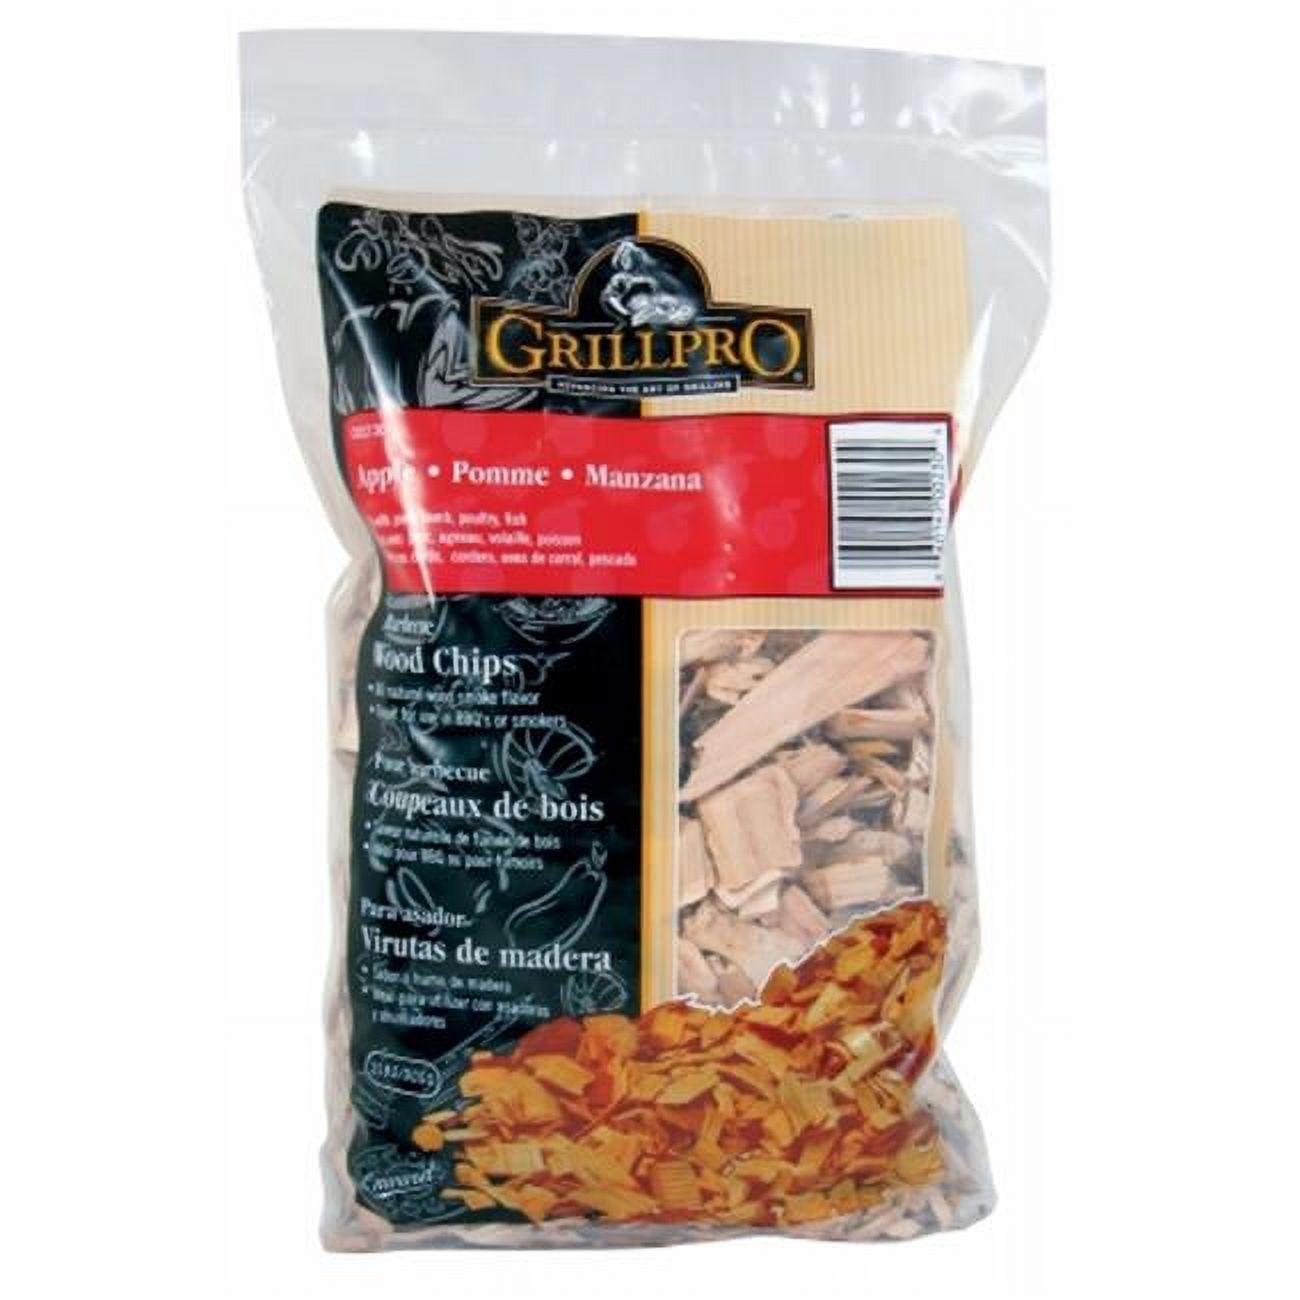 GrillPro Apple Wood Smoking Chips 2 lb - image 1 of 2